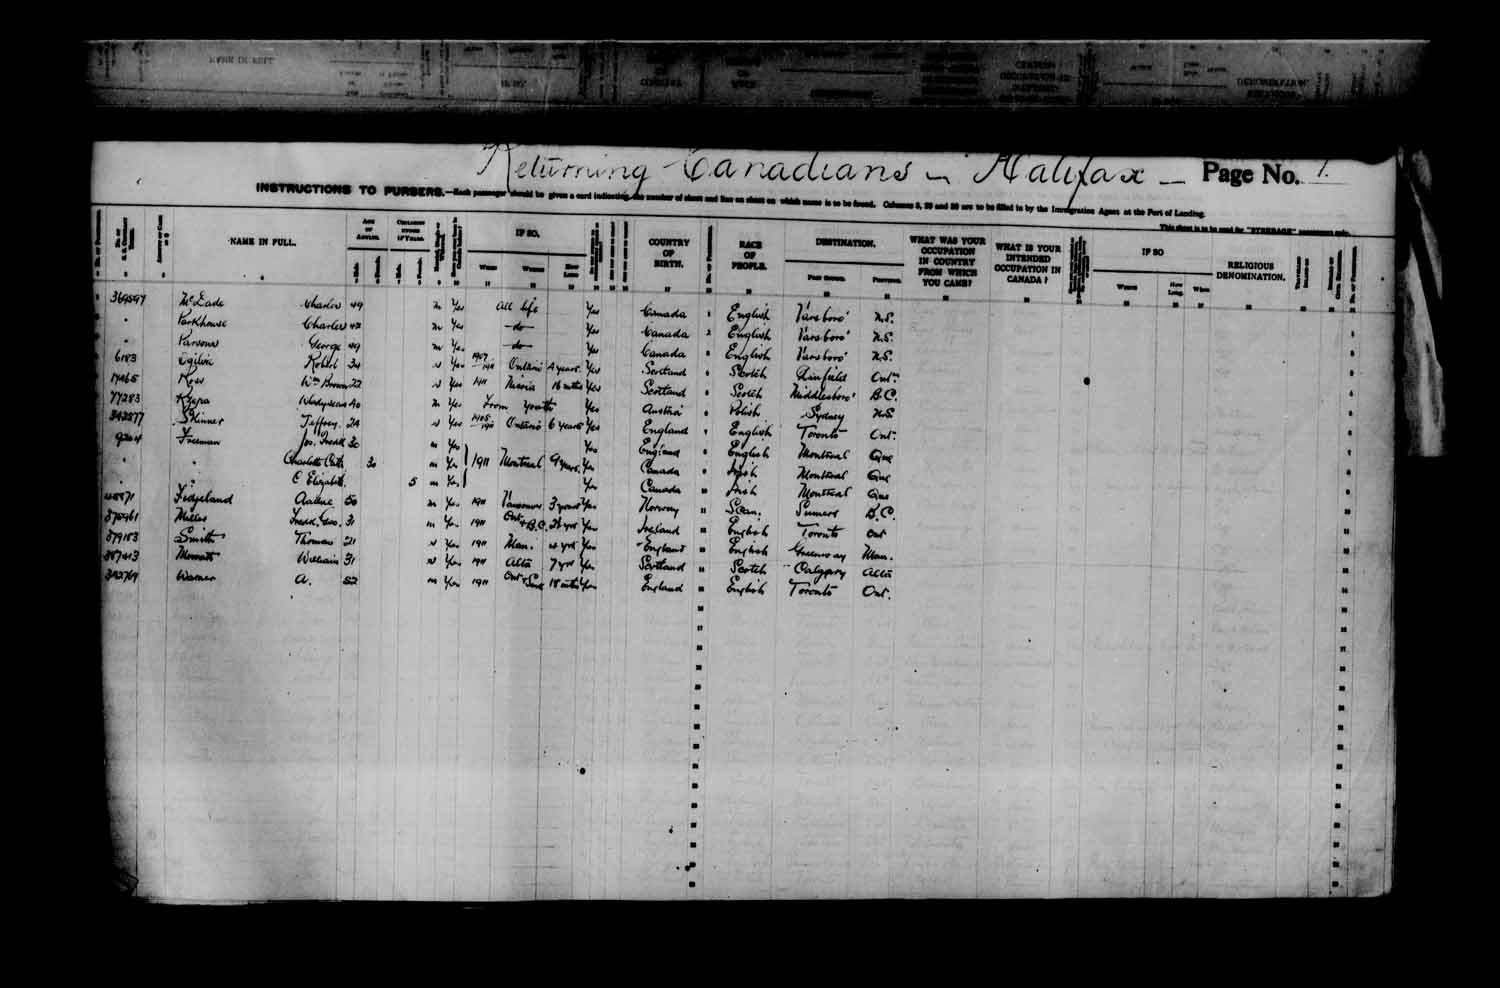 Digitized page of Passenger Lists for Image No.: e003622983